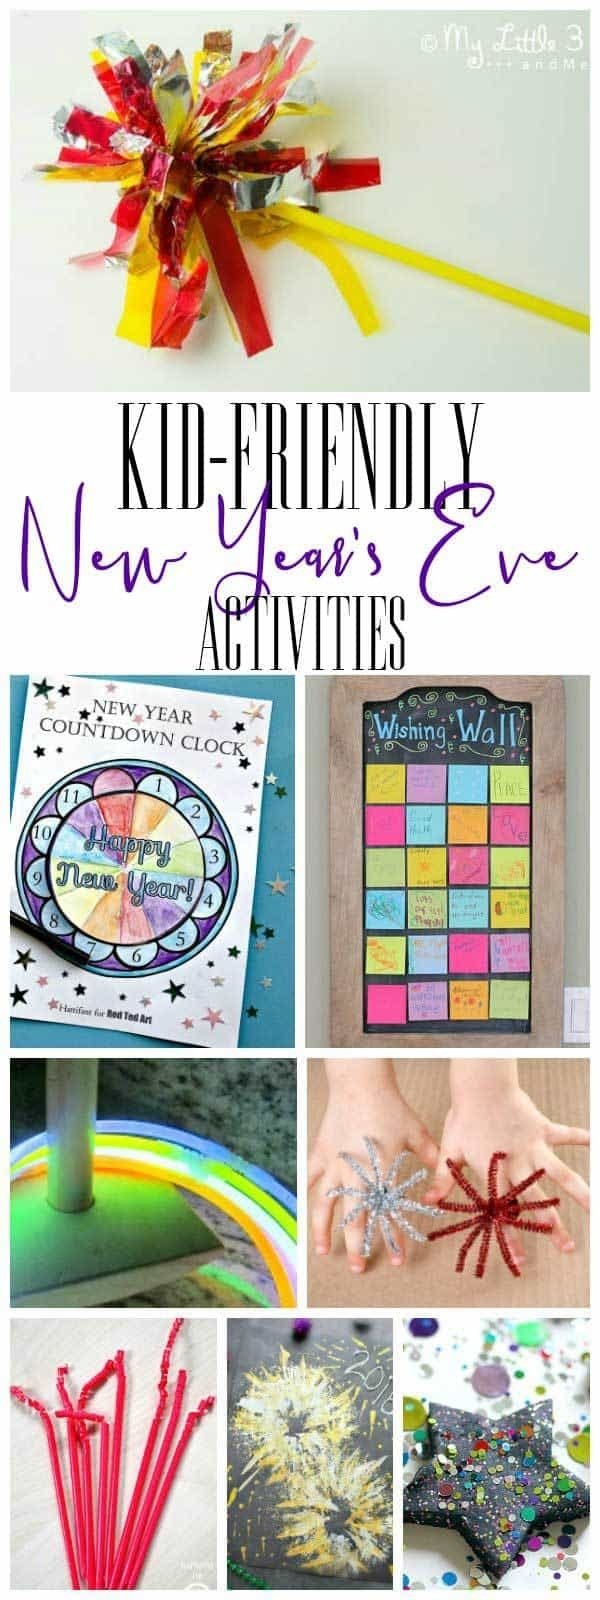 10 Cute New Years Eve Ideas For Families kid friendly new years eve activities for family celebrations 2022